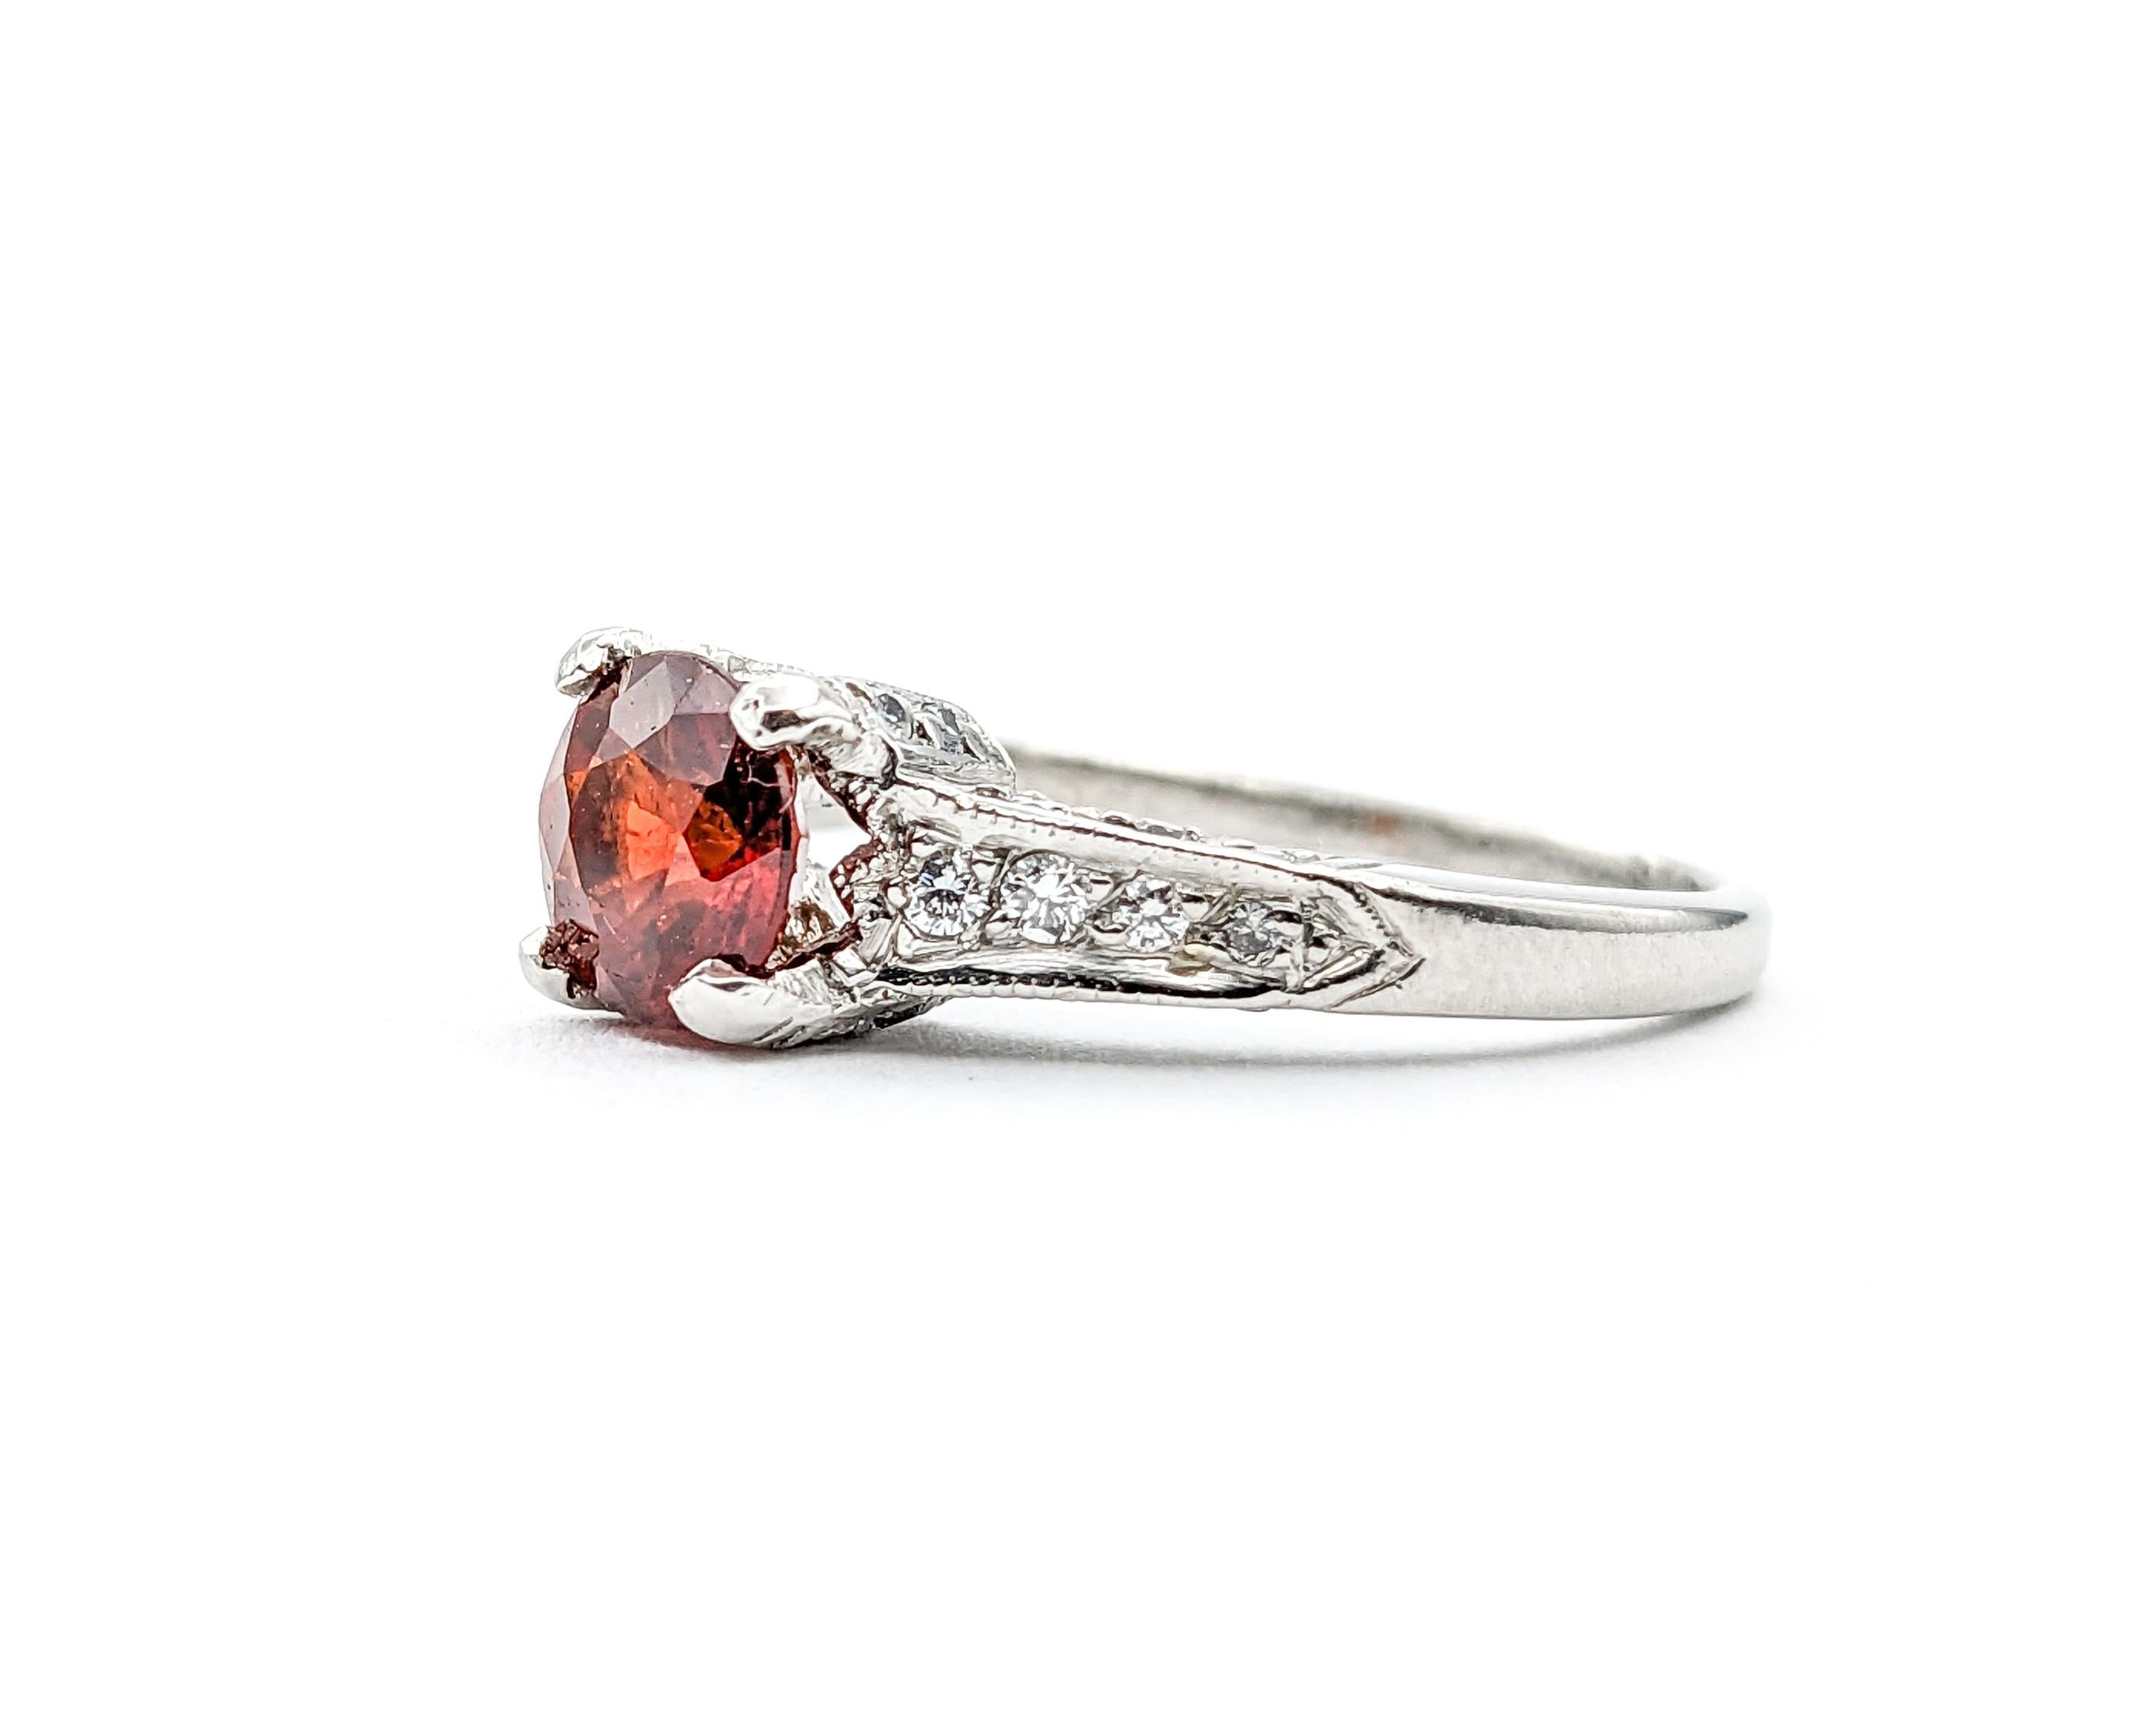 Designer Tacori 1.16ct Garnet & Diamond Ring In Platinum


Introducing our exquisite Tacori ring, masterfully crafted in 950pt platinum. This elegant piece features .25ctw of sparkling diamonds and is crowned with a stunning 1.16ct garnet. The